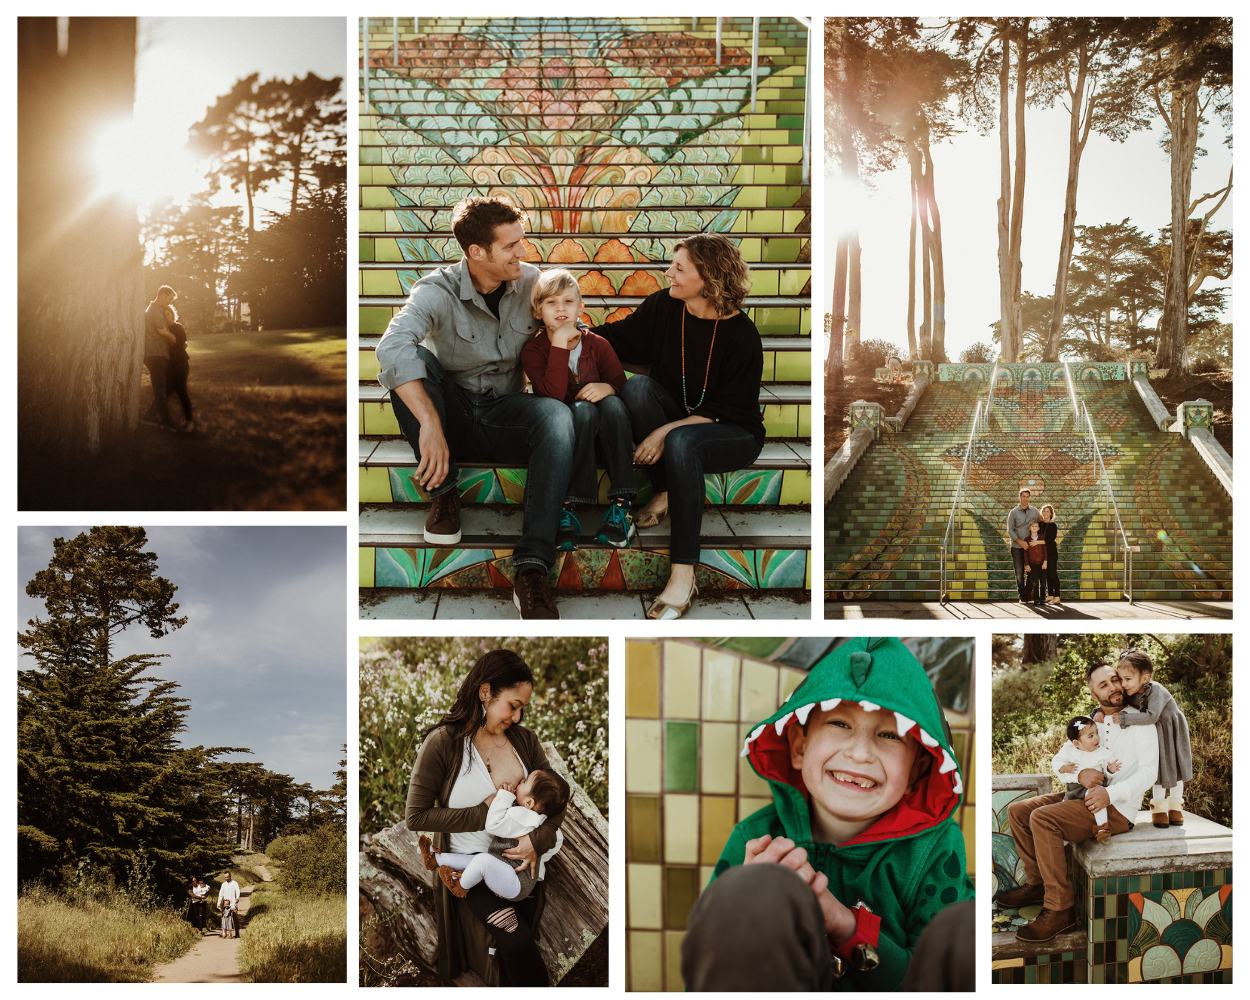 Collage of family photography sessions at Lincoln Park mosaic steps on California Street in San Francisco